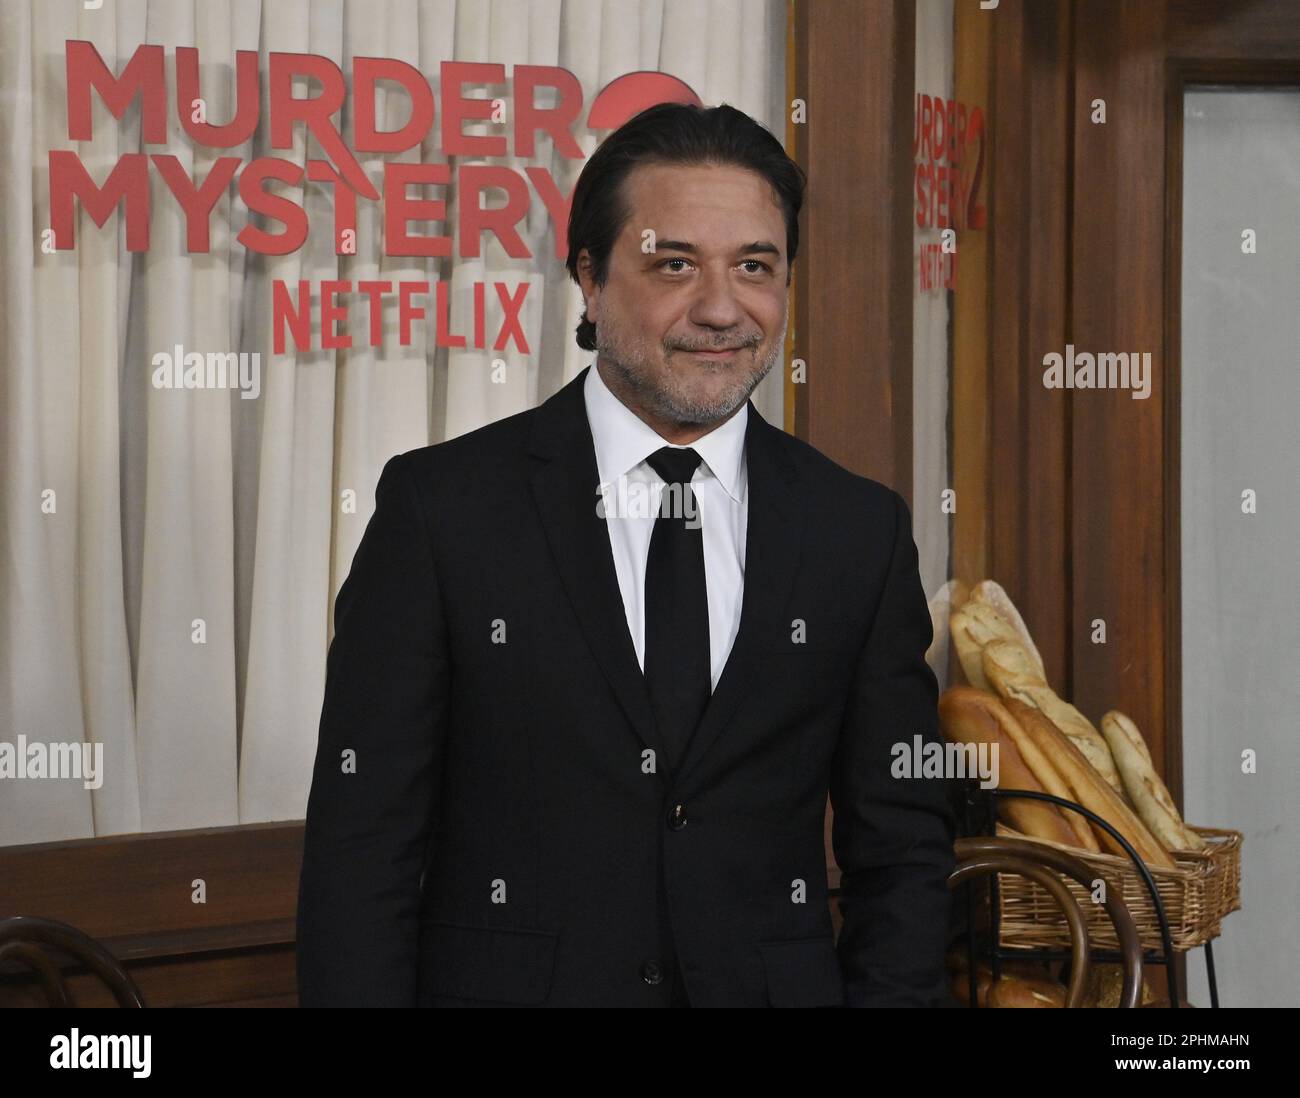 Cast of Netflix's Murder Mystery 2 pose together at their premiere in Los  Angeles 